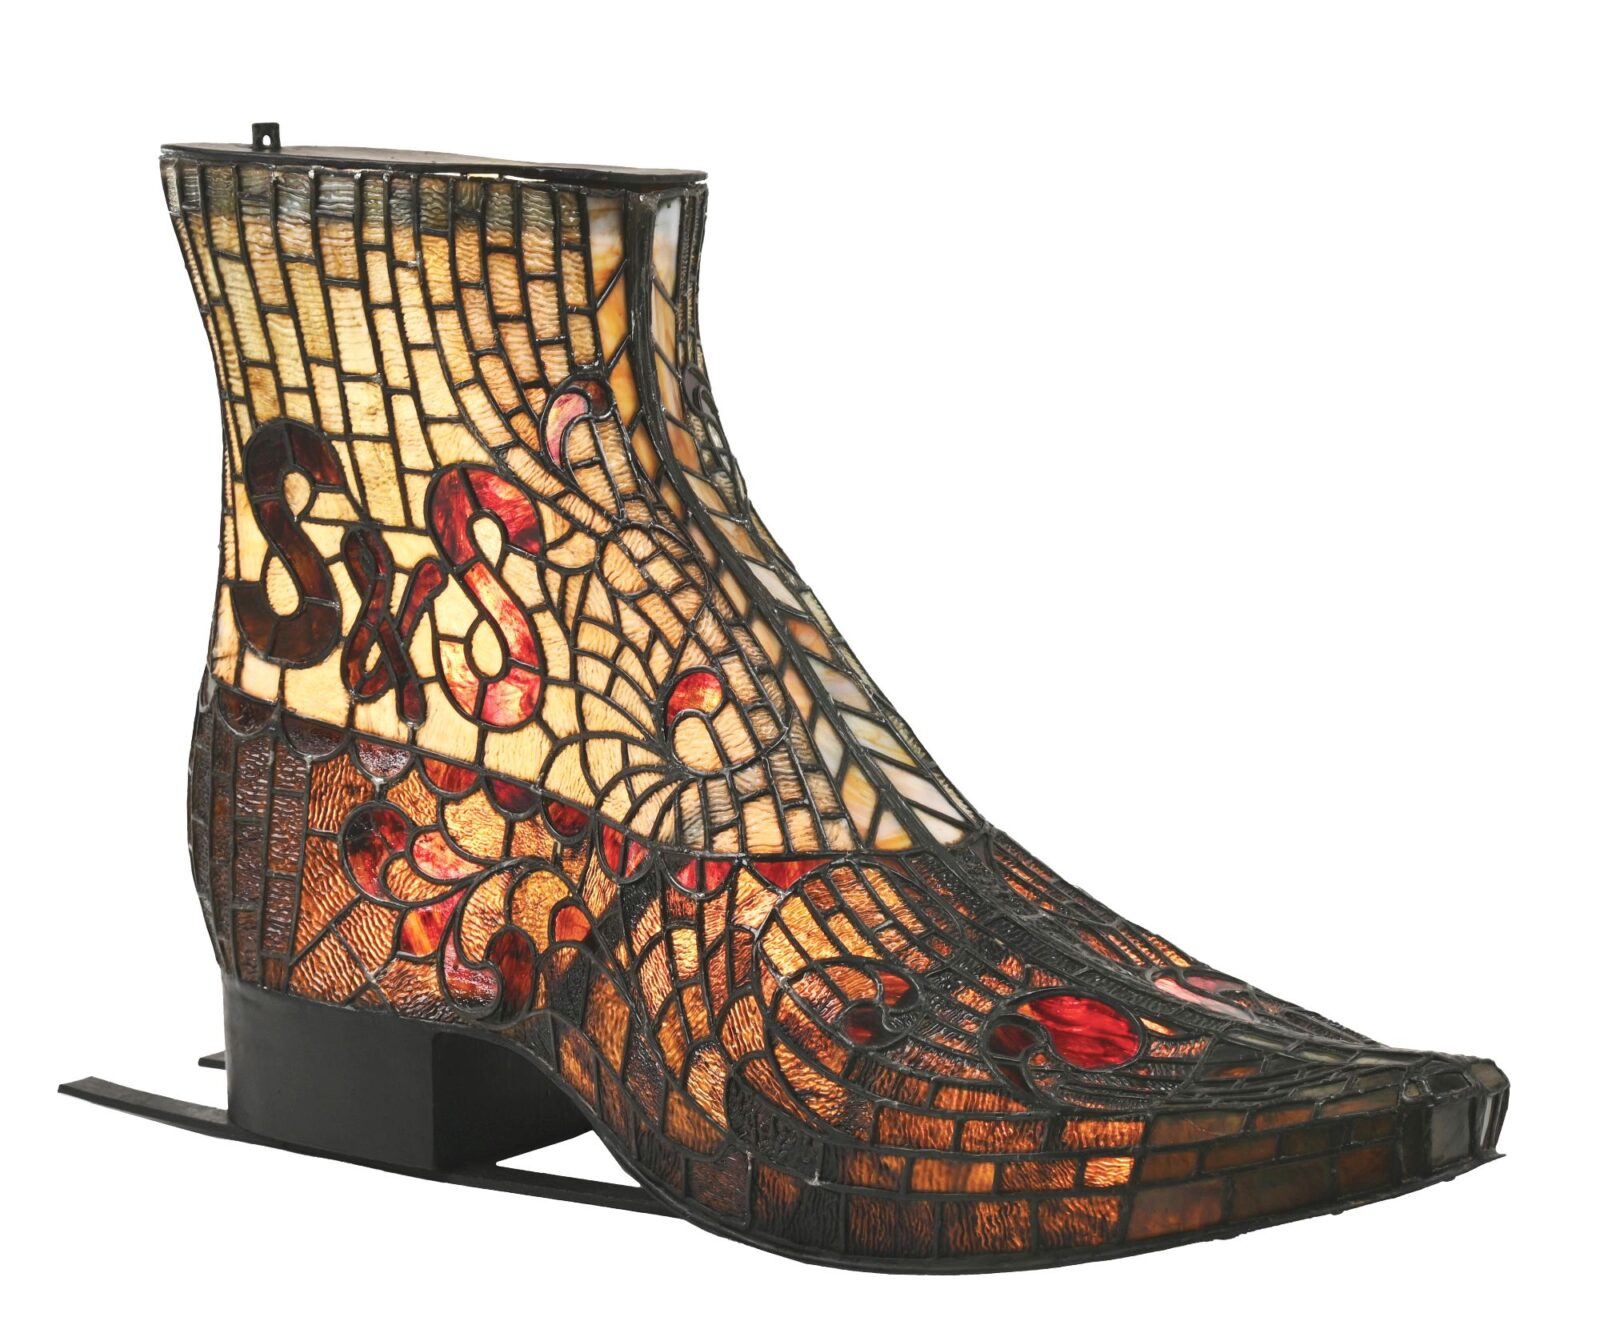 S & S Shoes figural trade sign, estimated at $40,000-$80,000 at Morphy.